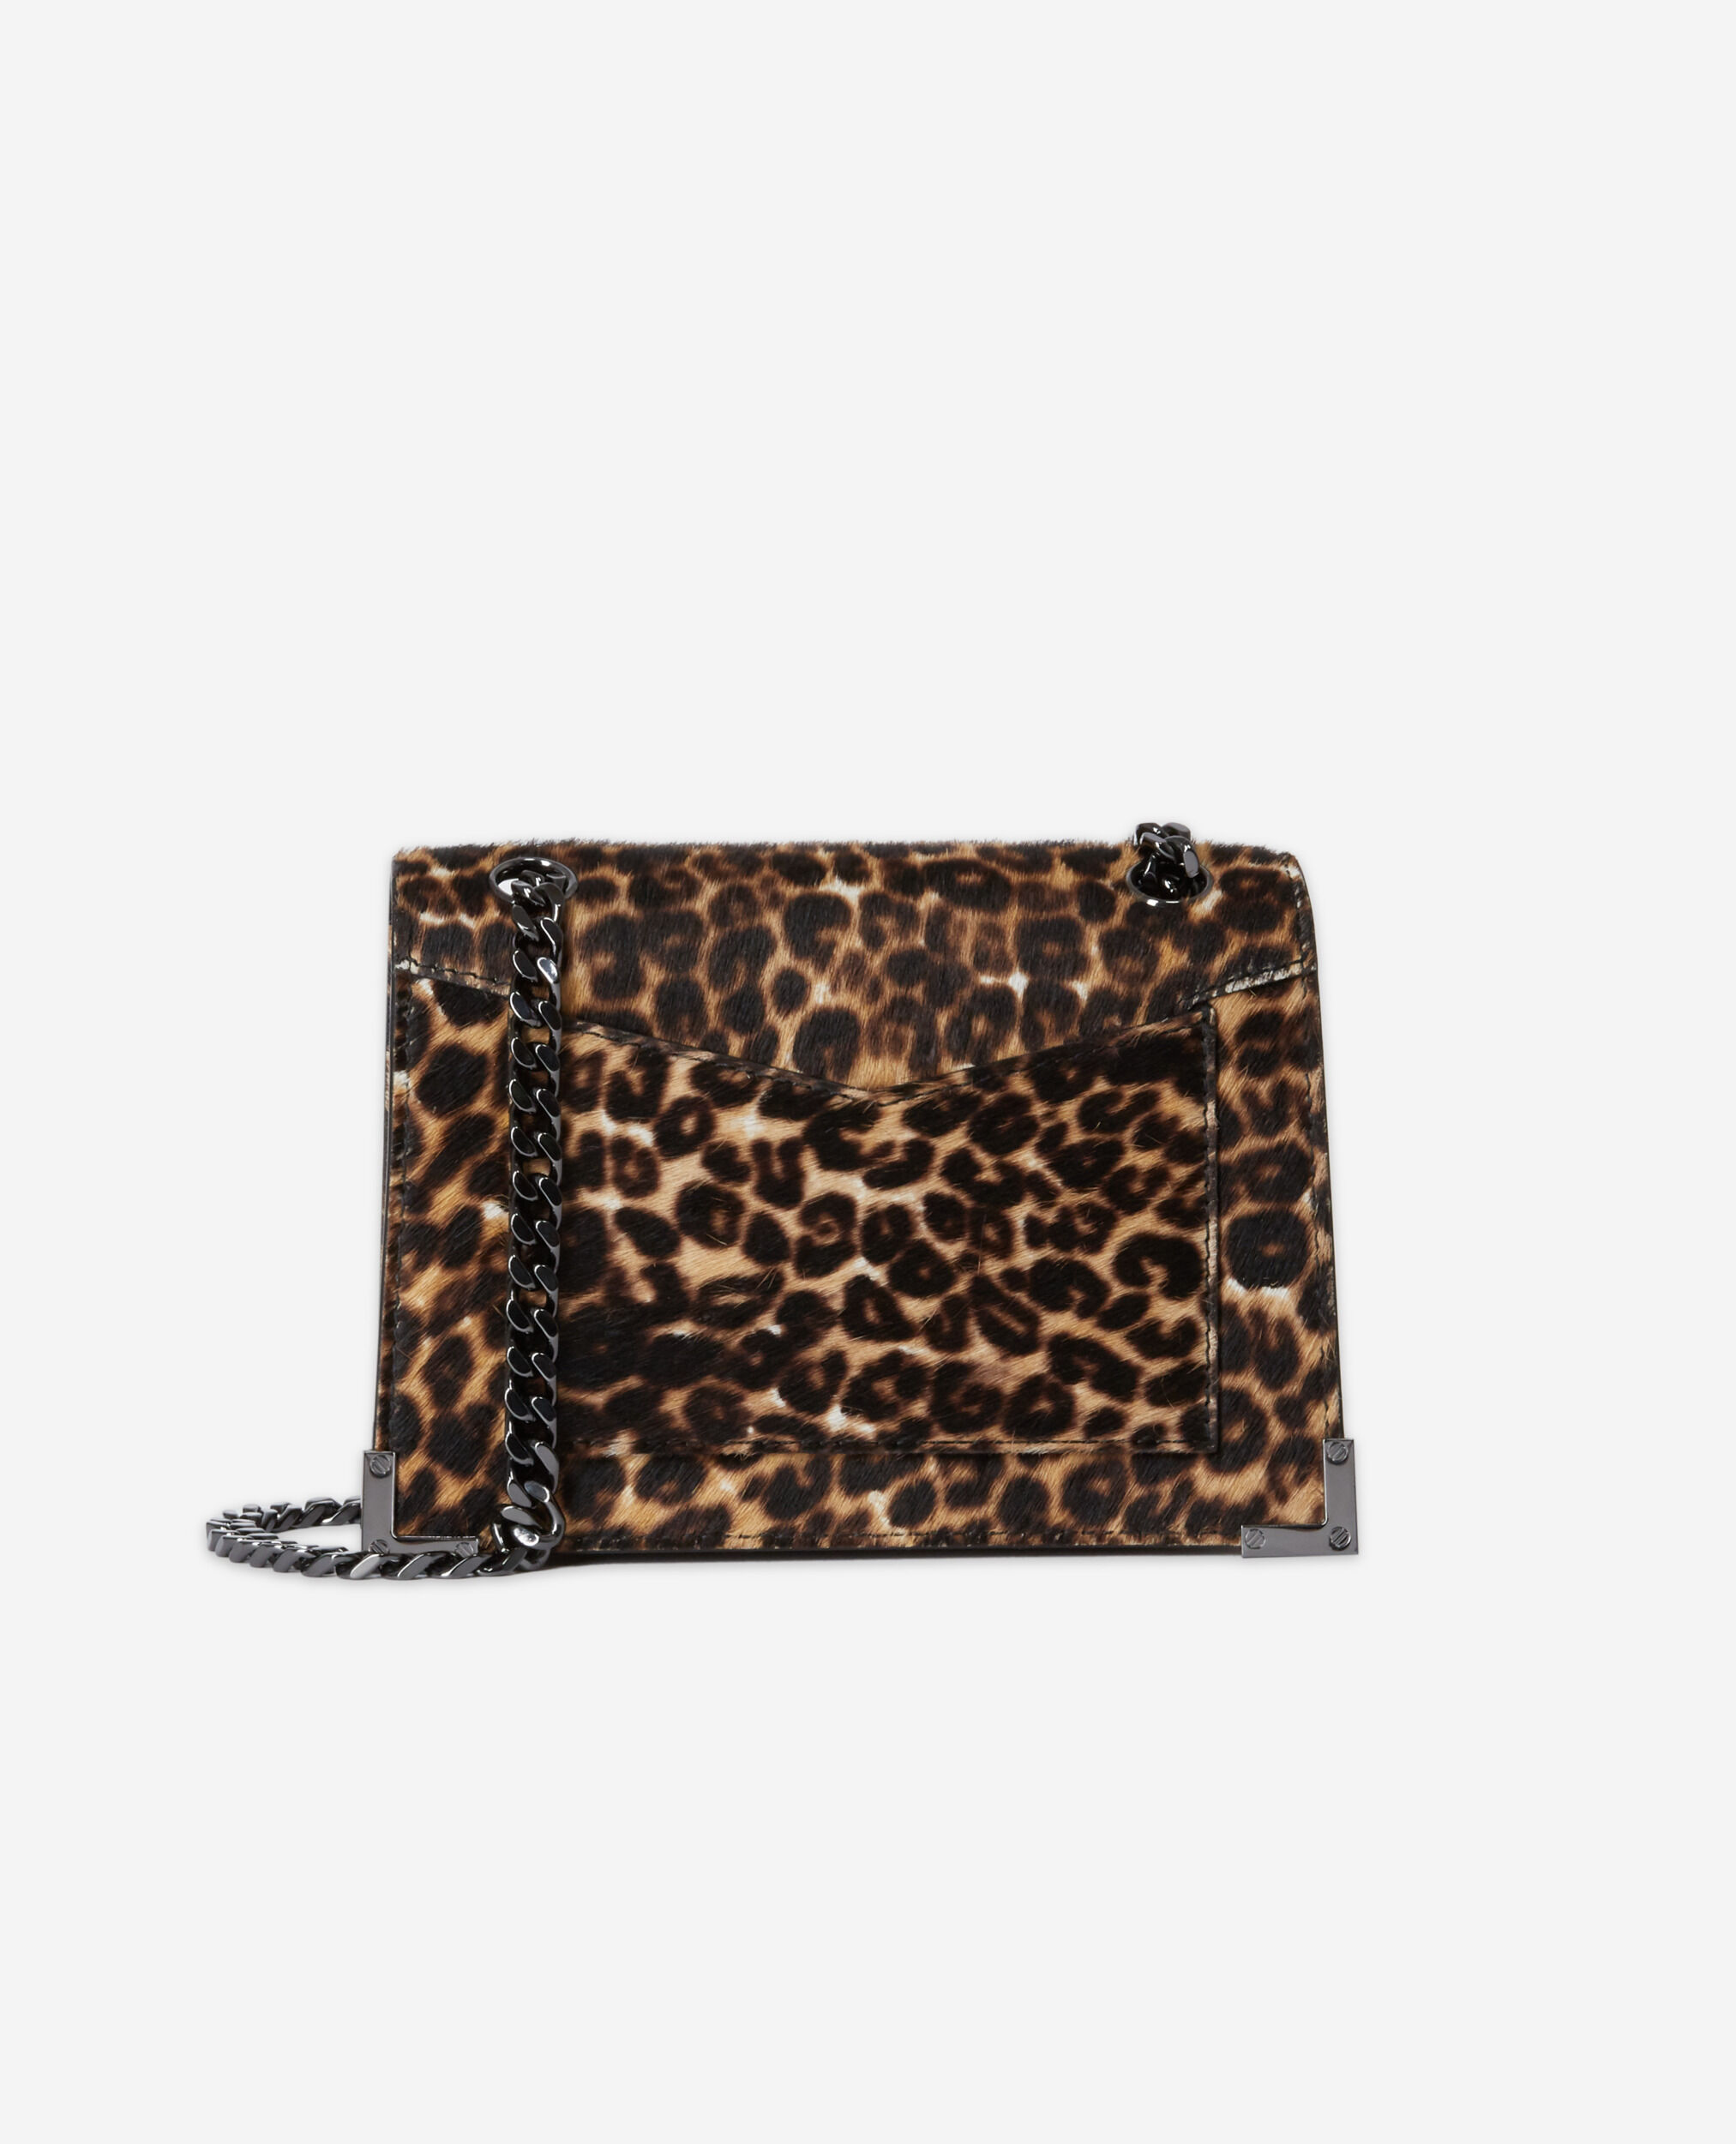 Small Emily bag in leopard print leather | The Kooples